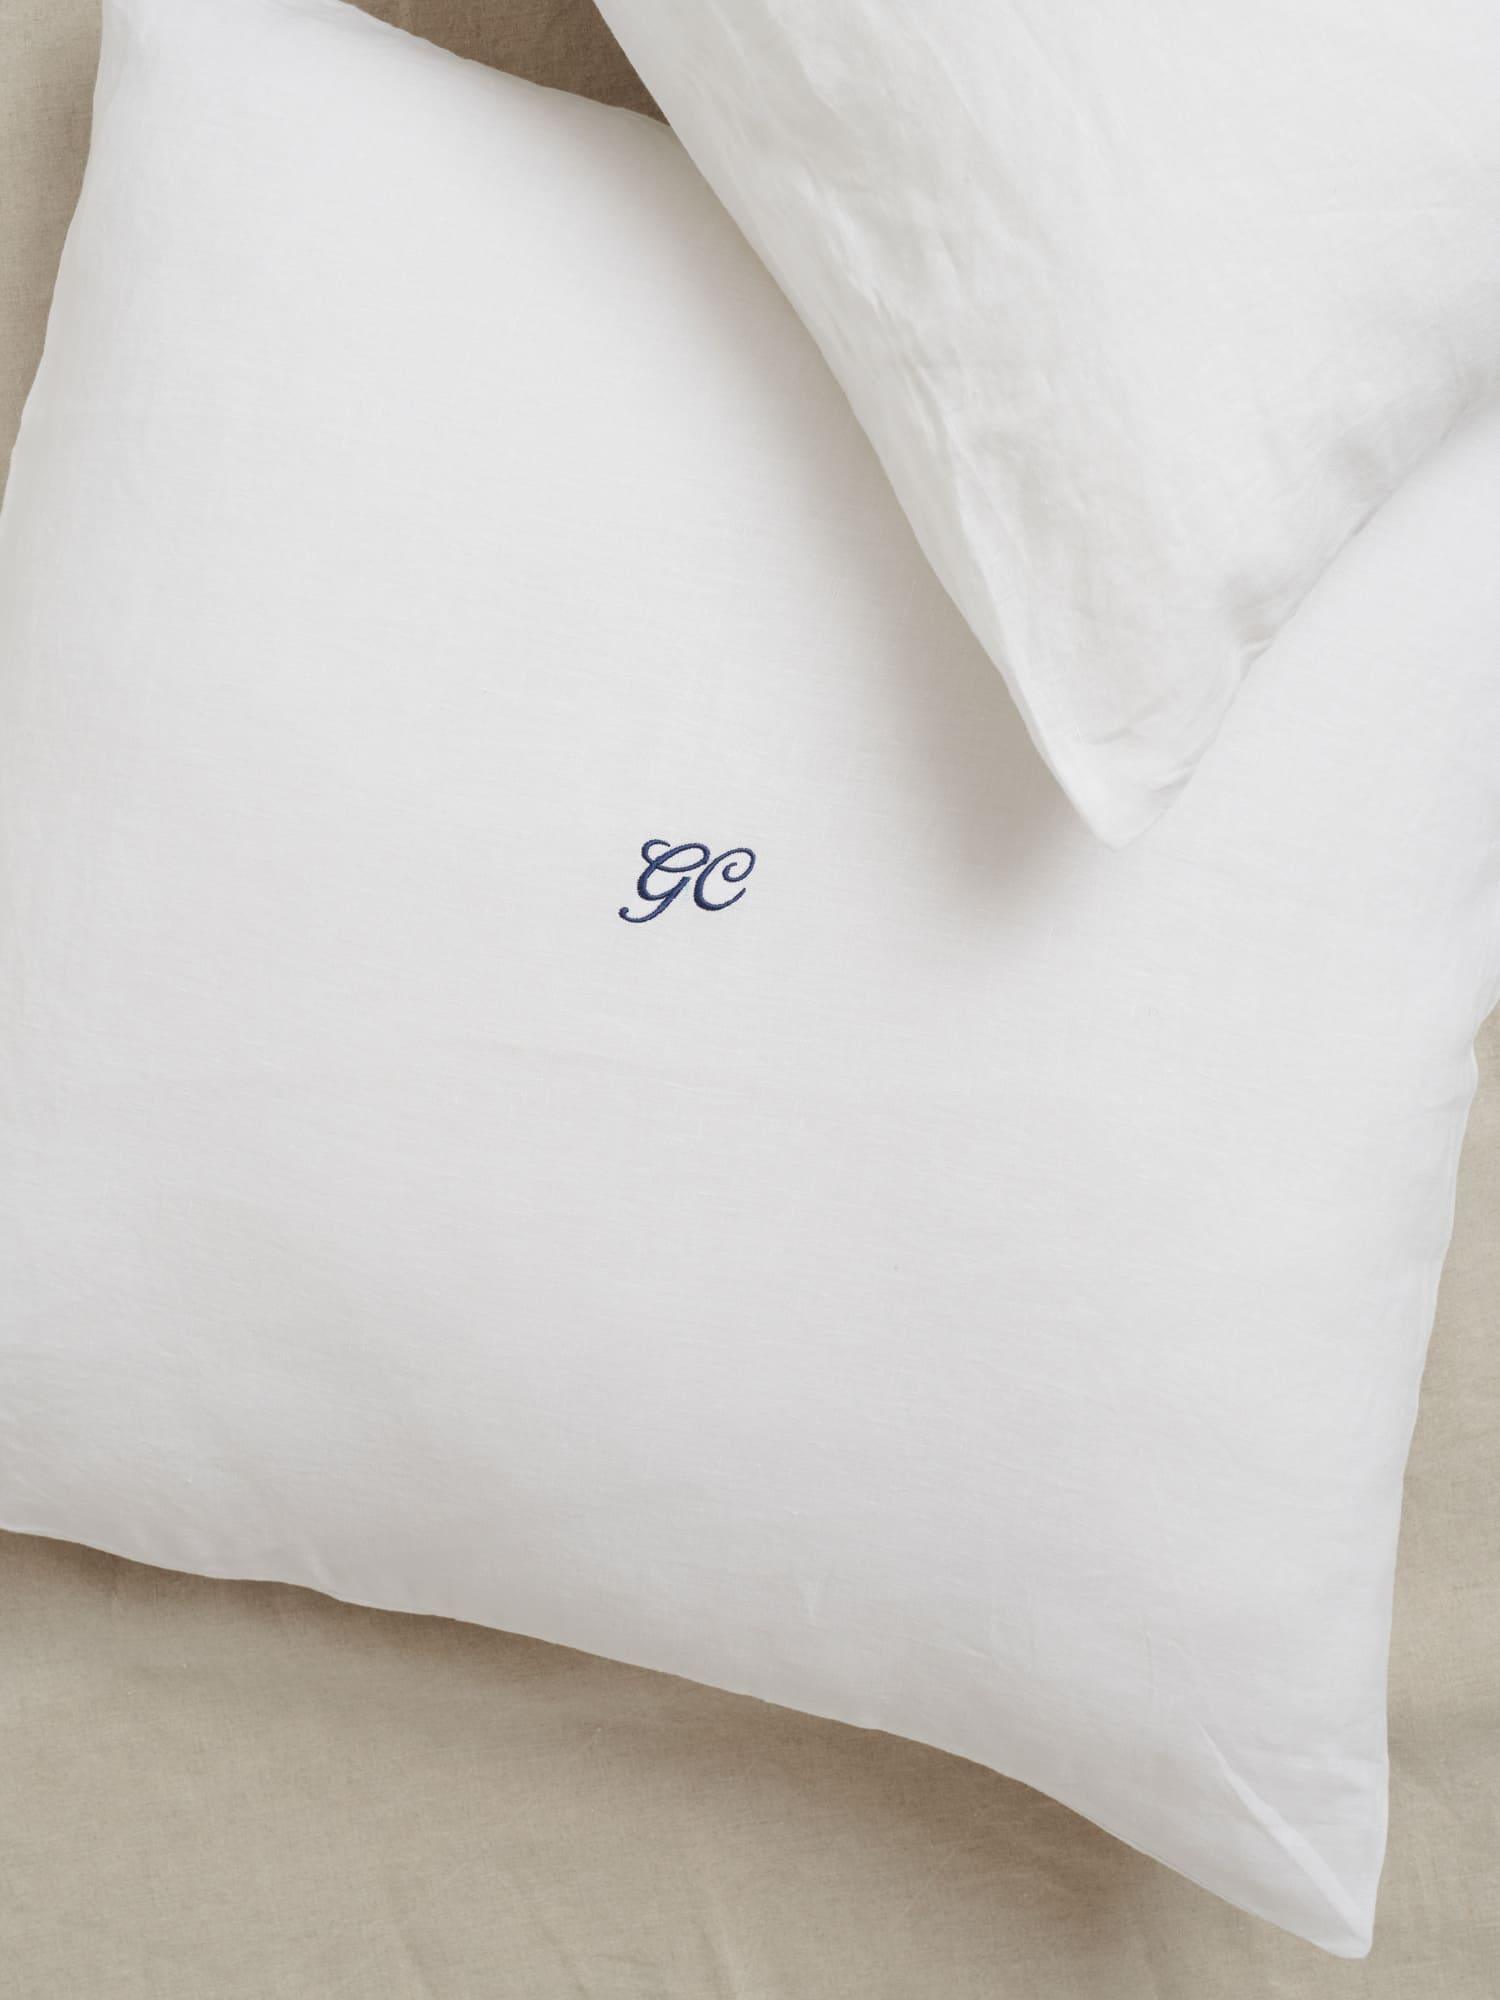 Embroidered Linen Pillowslip in White